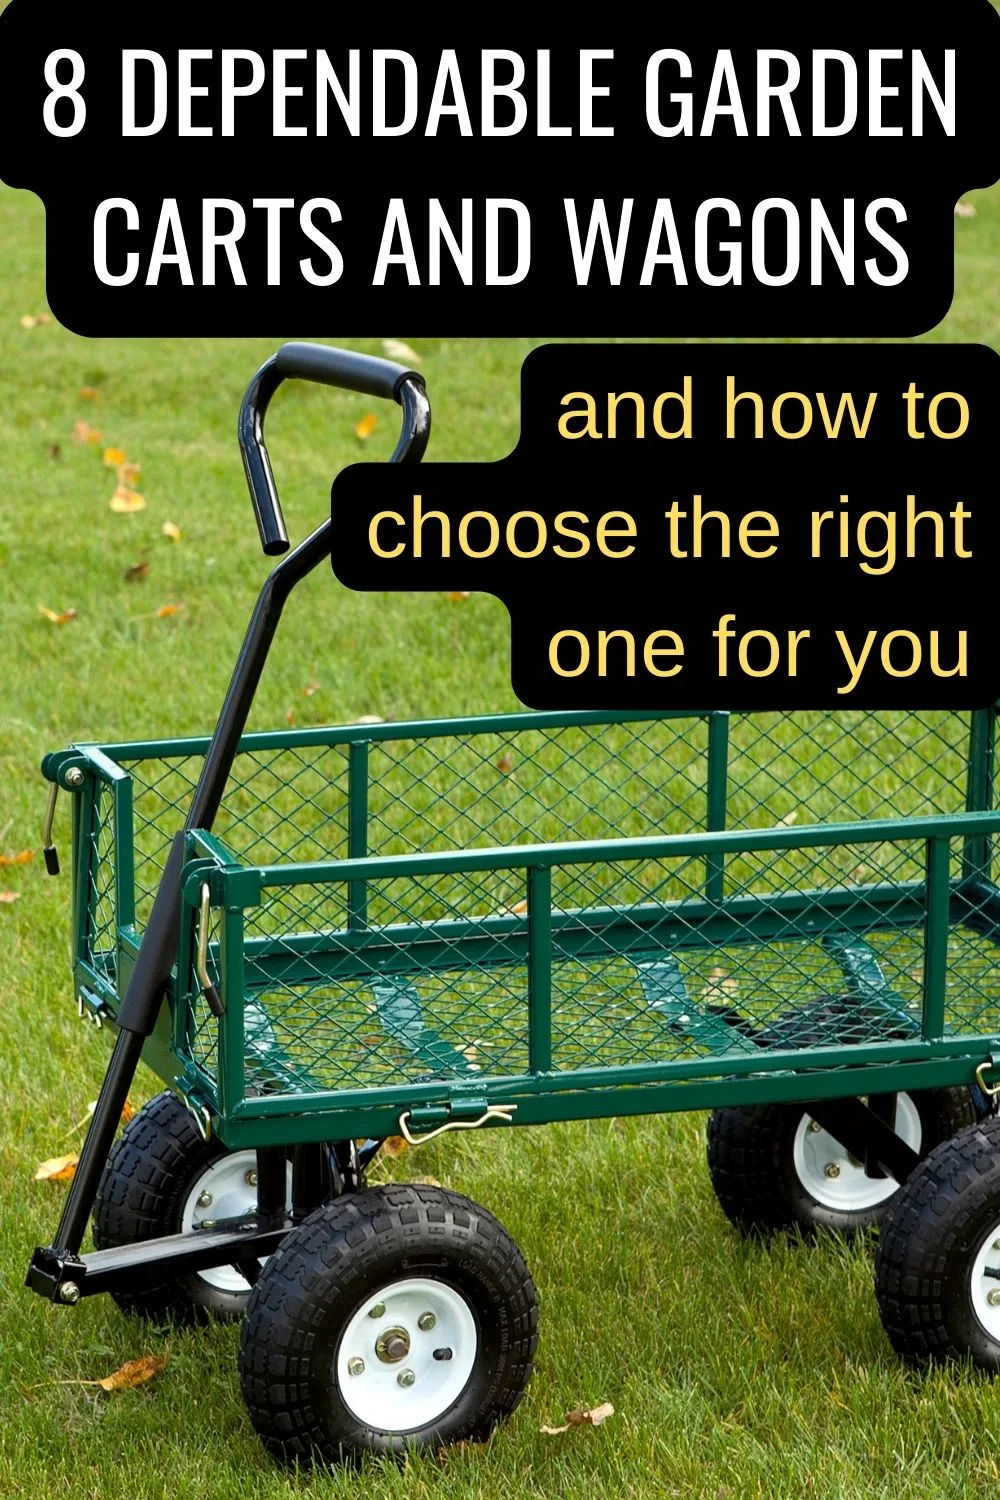 8 dependable garden carts and wagons